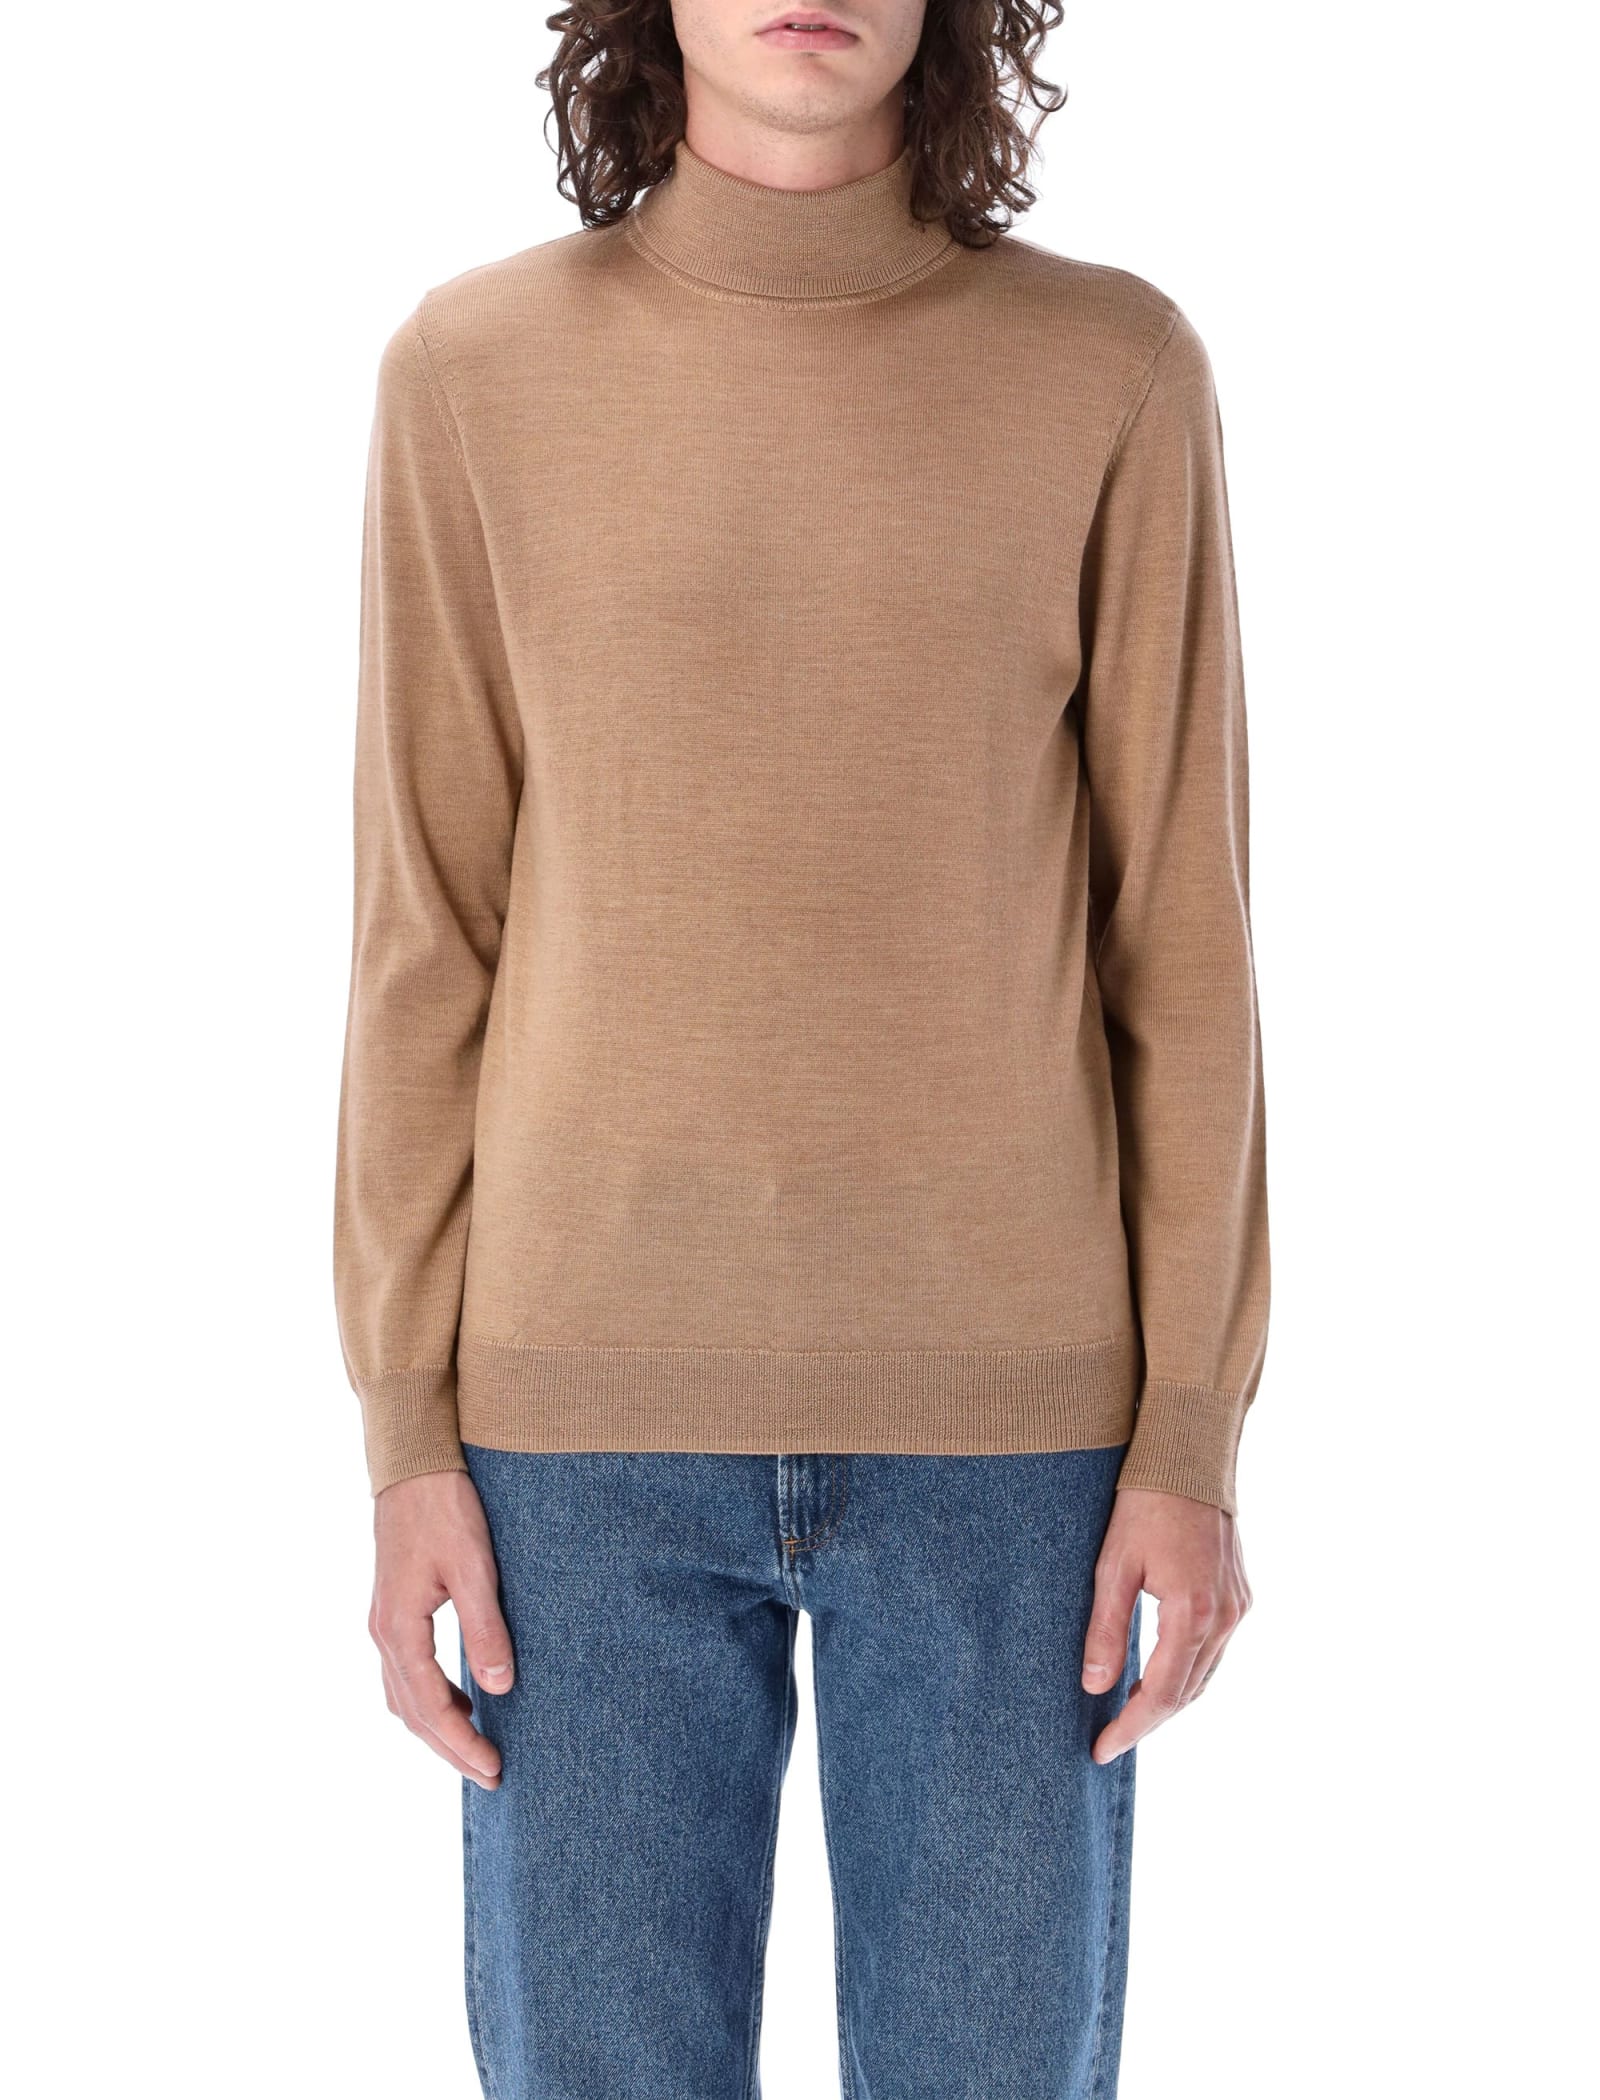 A.P.C. Dundee Hogh-neck Sweater